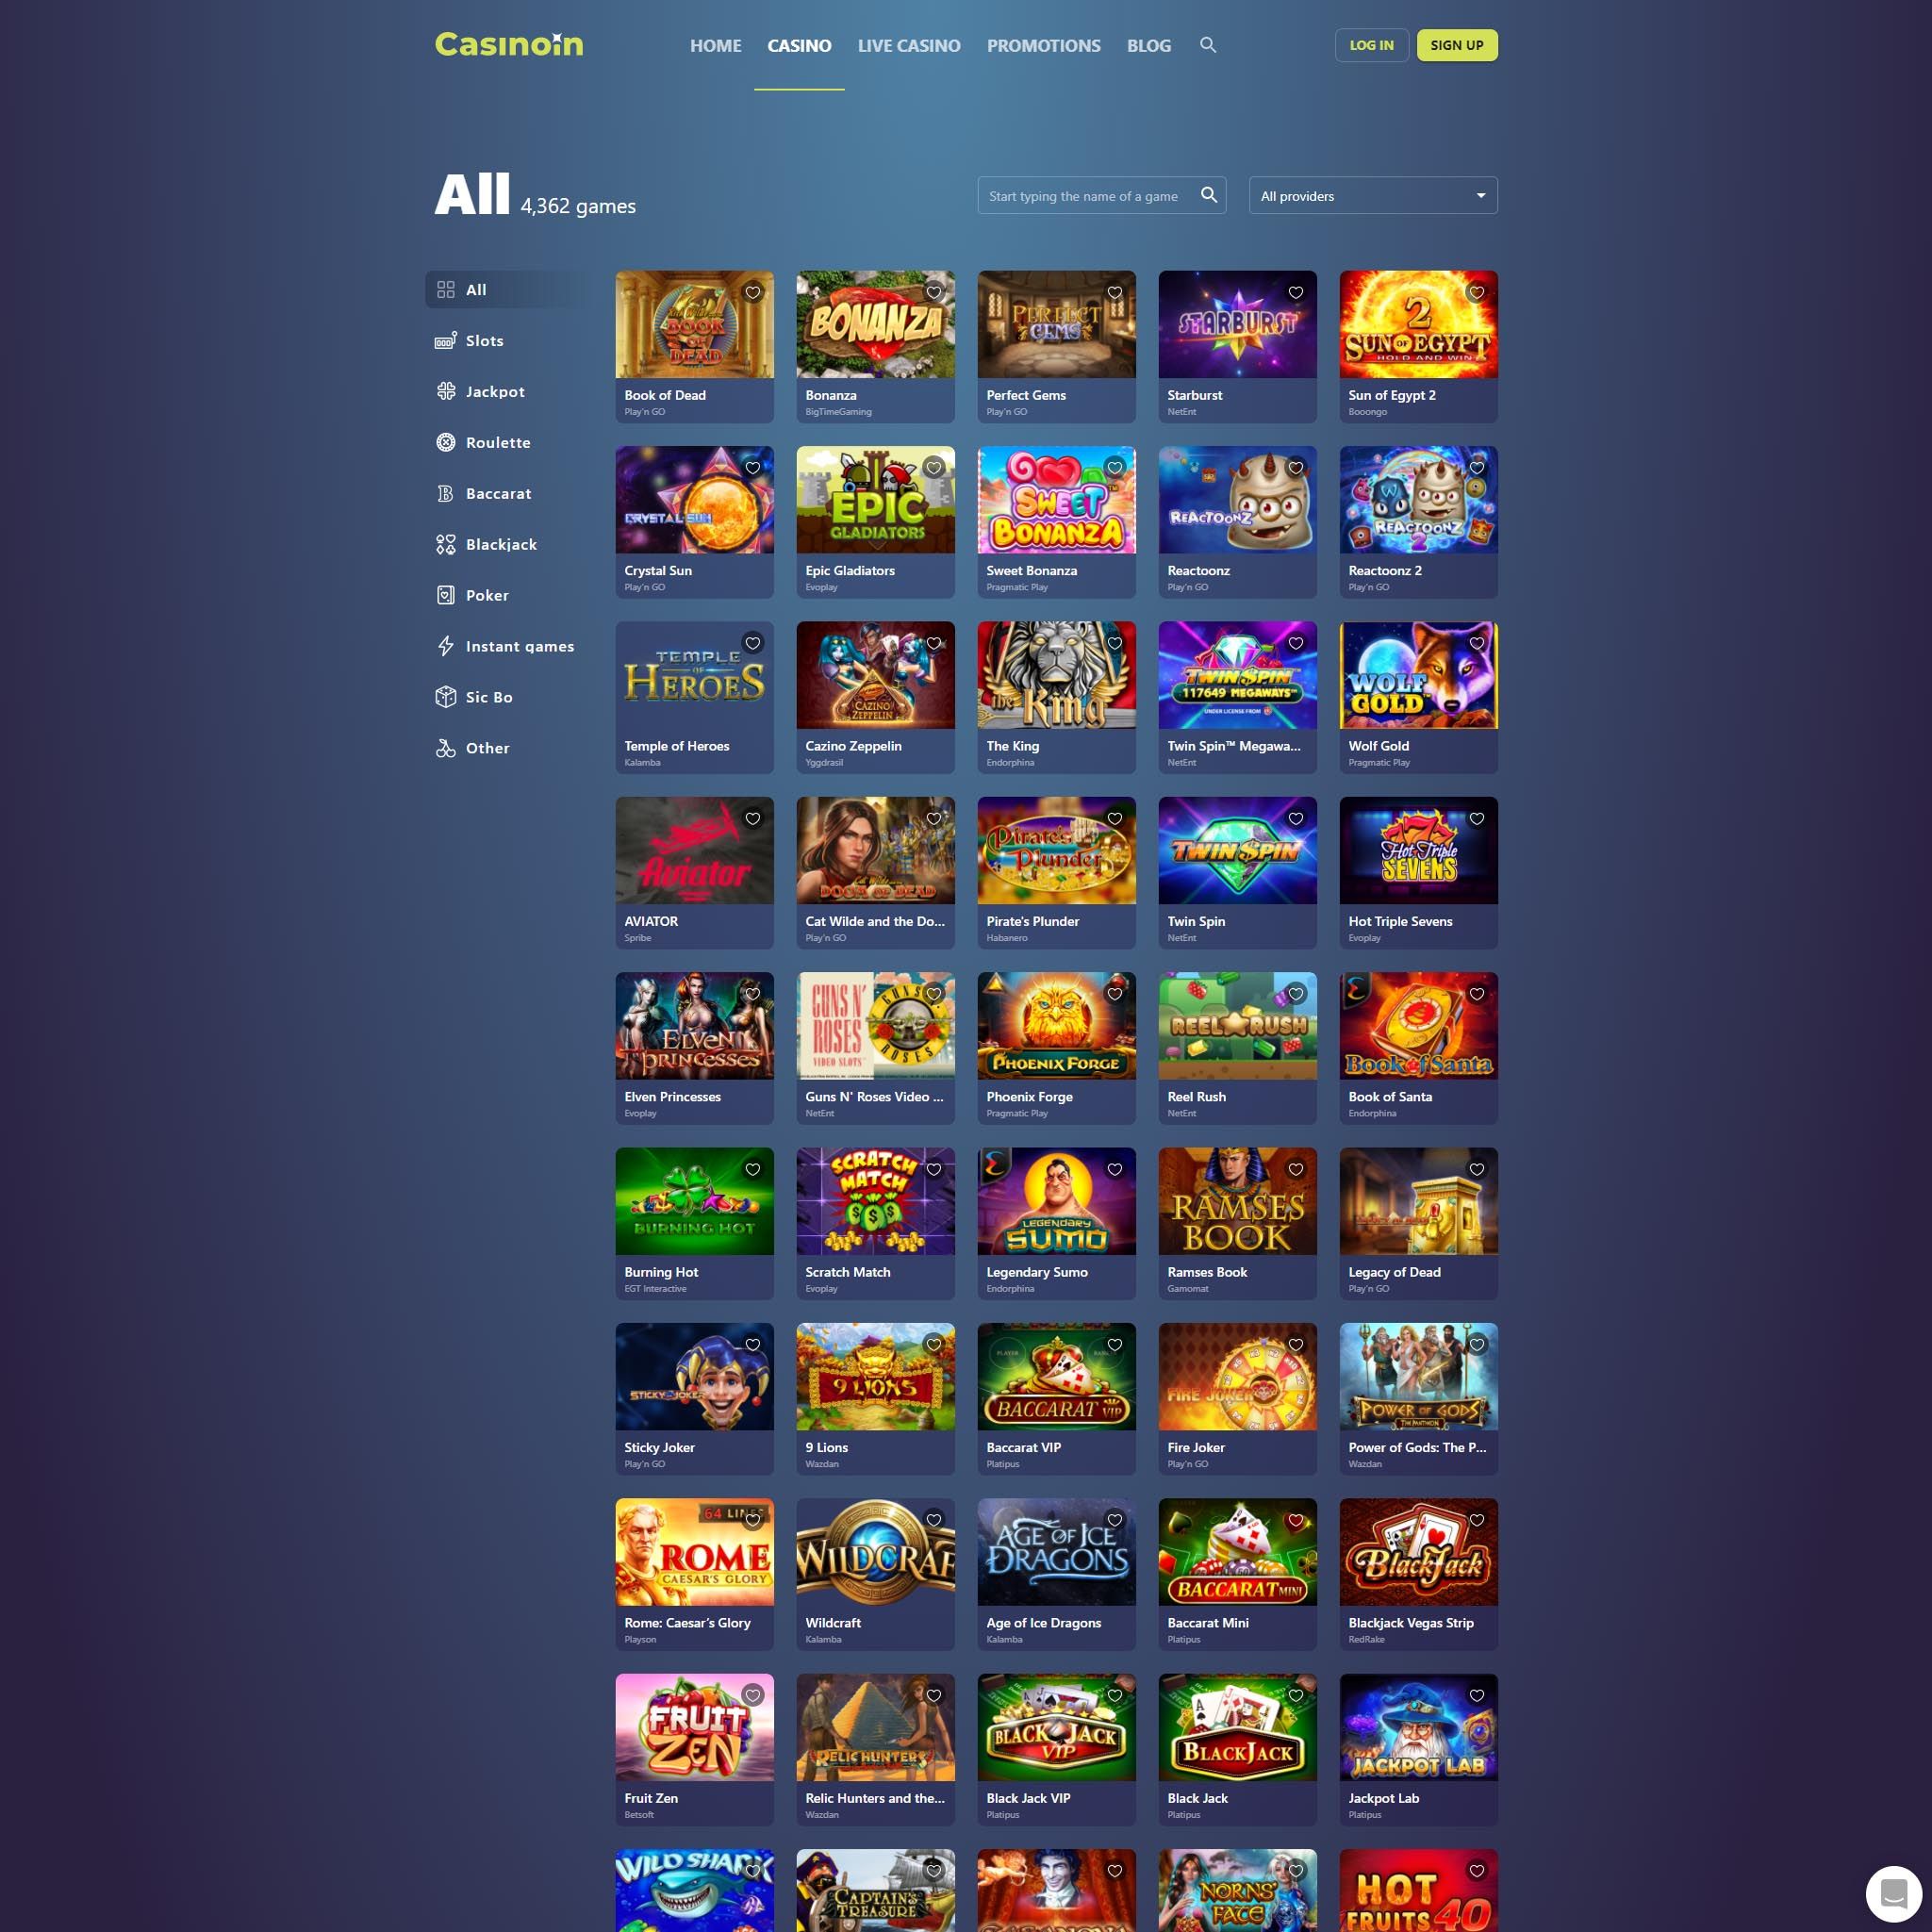 Casinoin full games catalogue